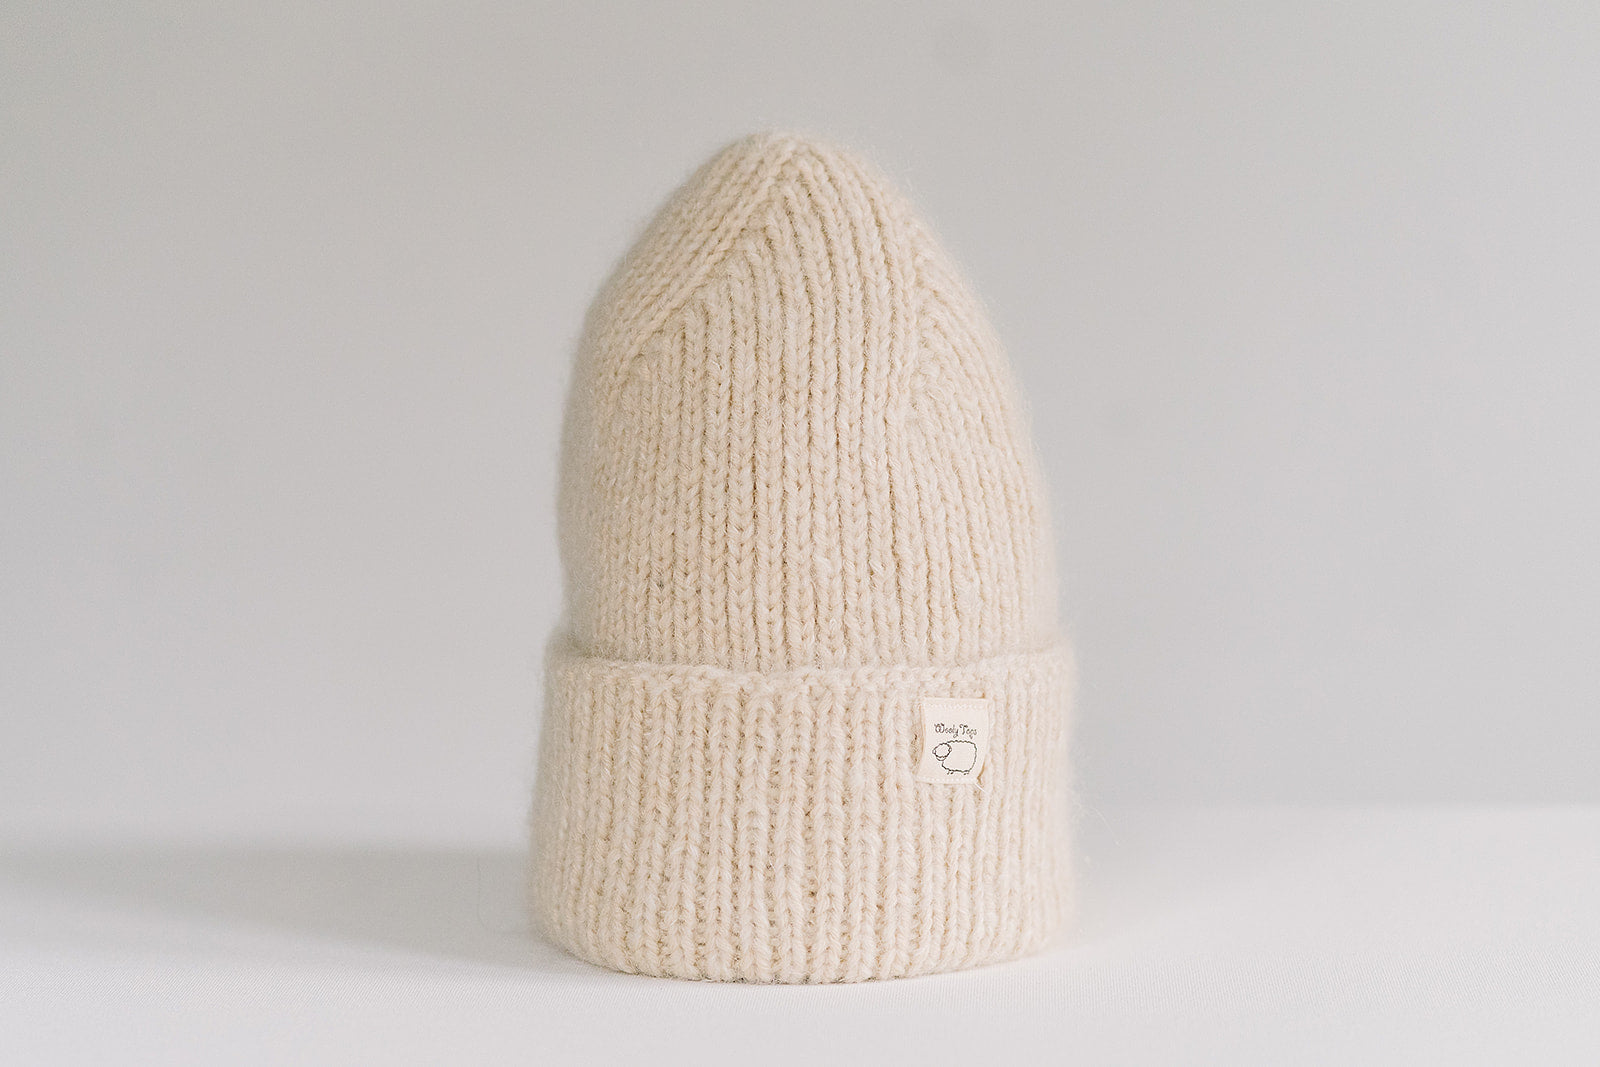 Hand-knitted Wooly Top hat in cream.